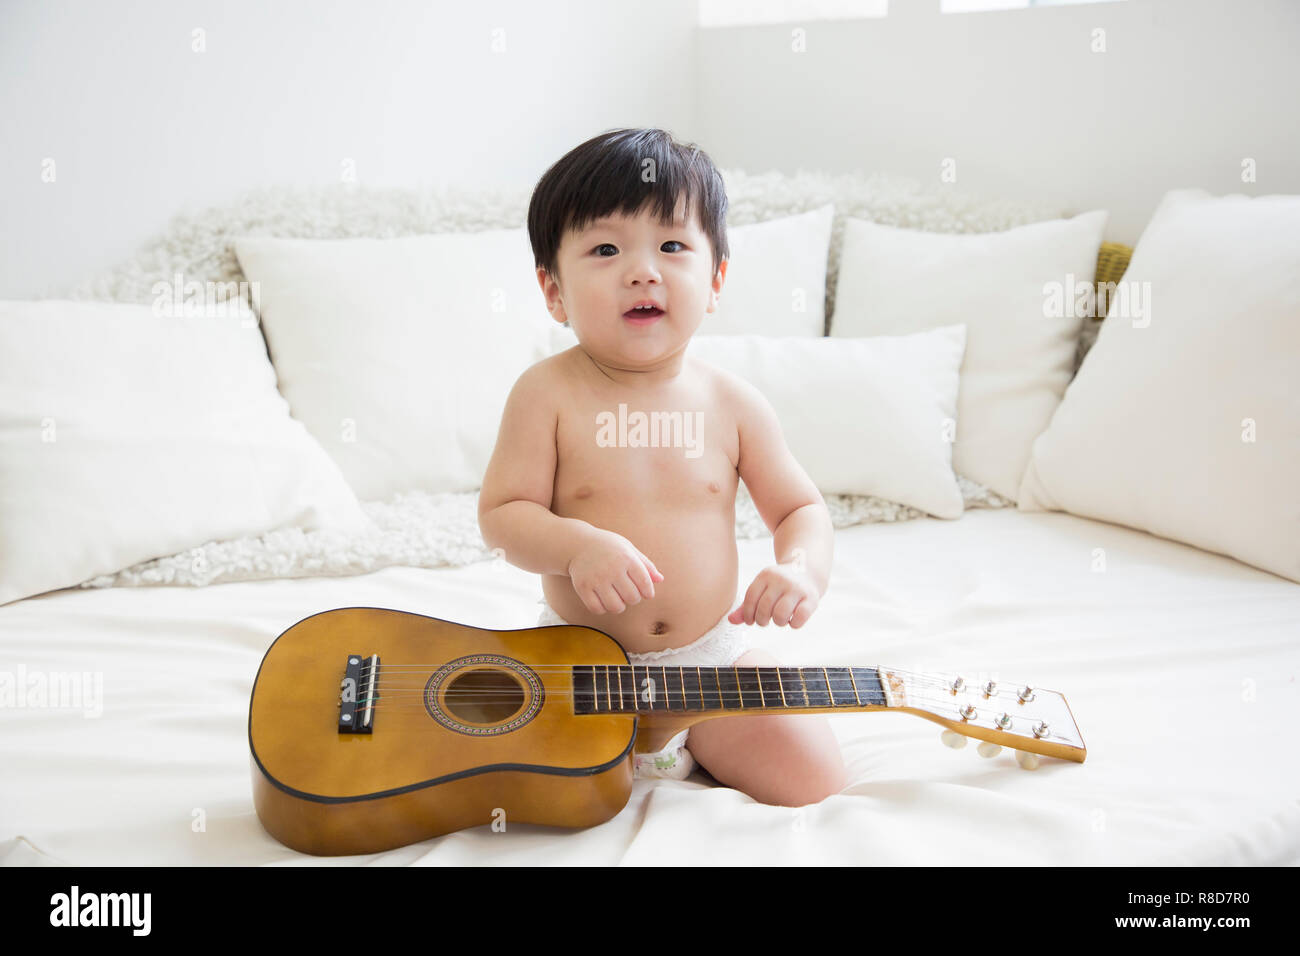 Little two cute babies photo. Baby wearing diaper in white bedroom. 267 Stock Photo